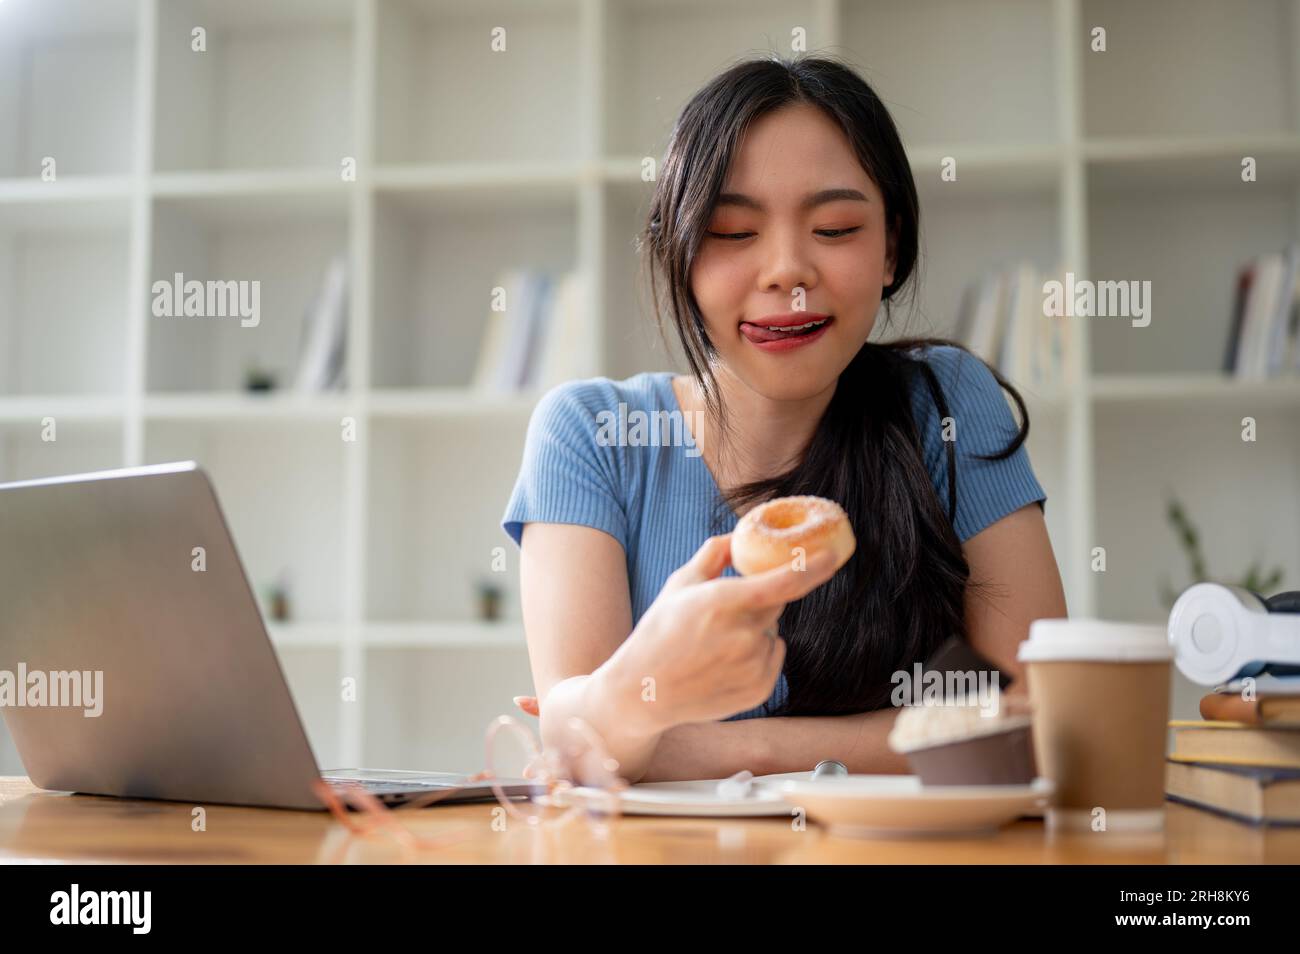 A pretty and happy young Asian woman enjoying her snack time, eating doughnuts at her study table at home. People and food concept Stock Photo